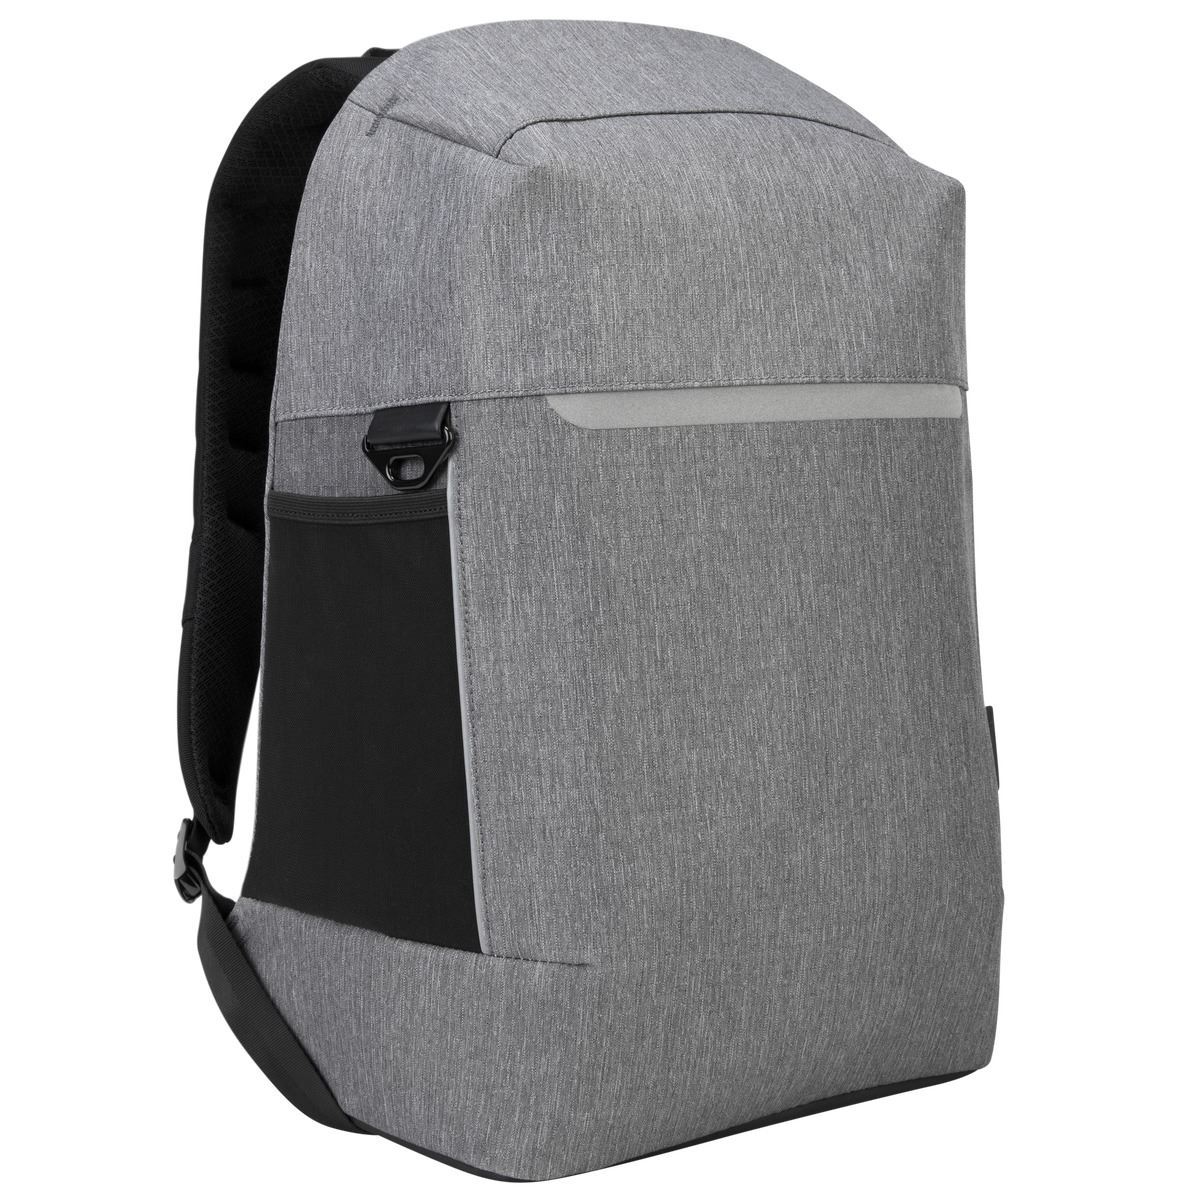 CityLite Security Backpack best for work, commute or university, fits up to 15.6” Laptop – Grey